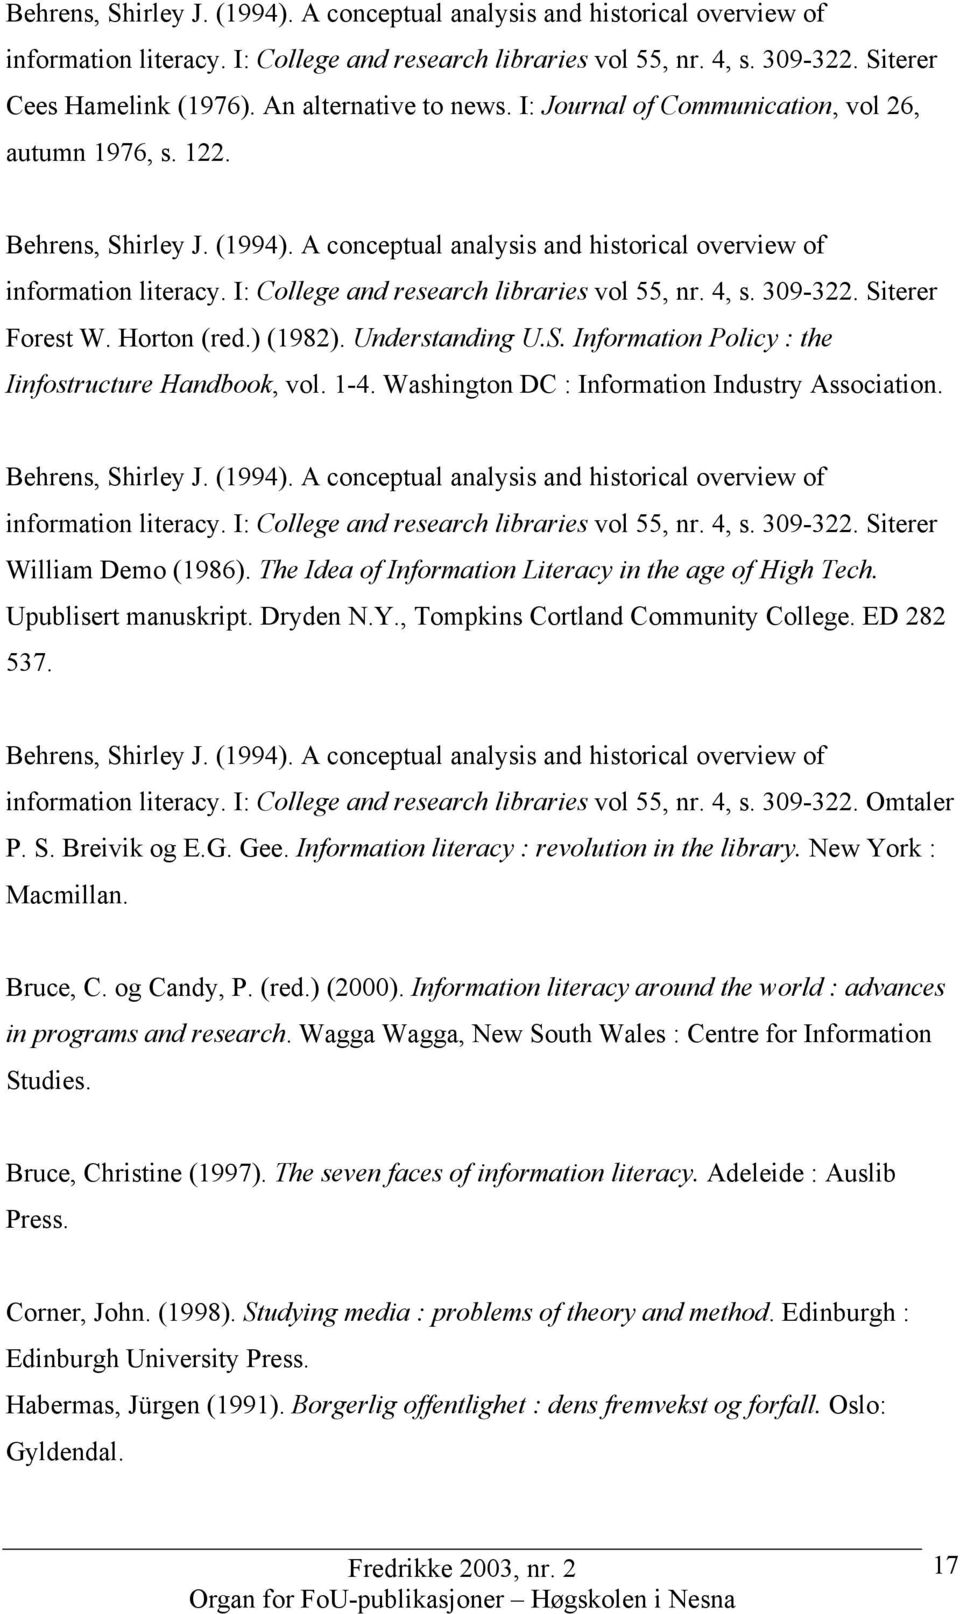 I: College and research libraries vol 55, nr. 4, s. 309-322. Siterer Forest W. Horton (red.) (1982). Understanding U.S. Information Policy : the Iinfostructure Handbook, vol. 1-4.